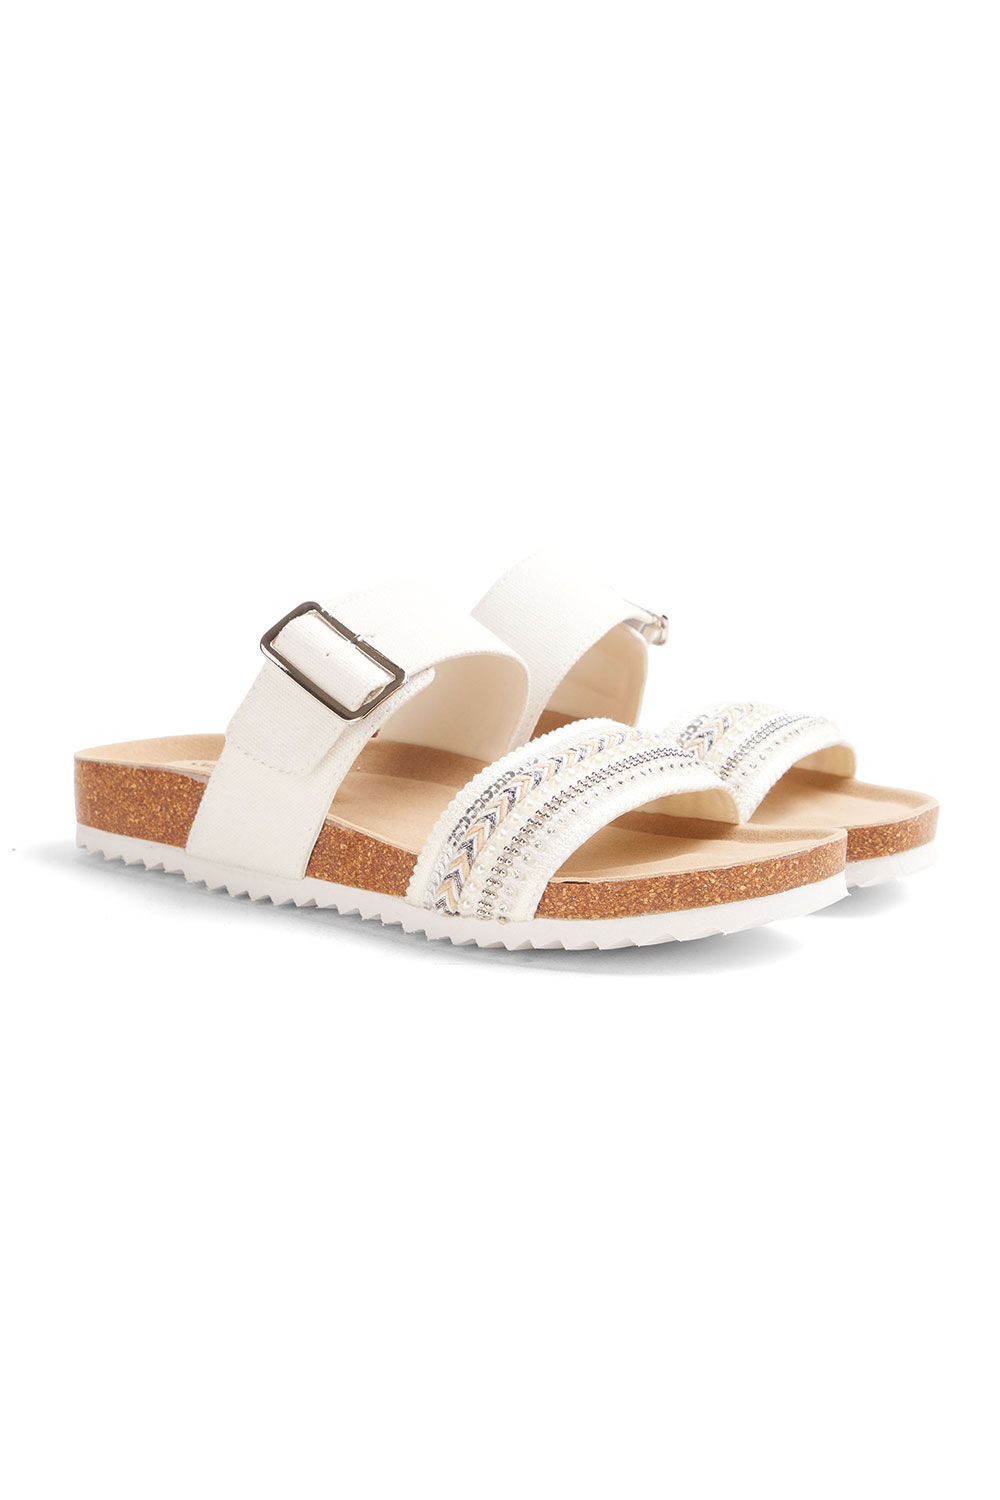 Cushion Walk Grey - Double Strap Sandal With Sequin and Buckle Detail, Size: 4